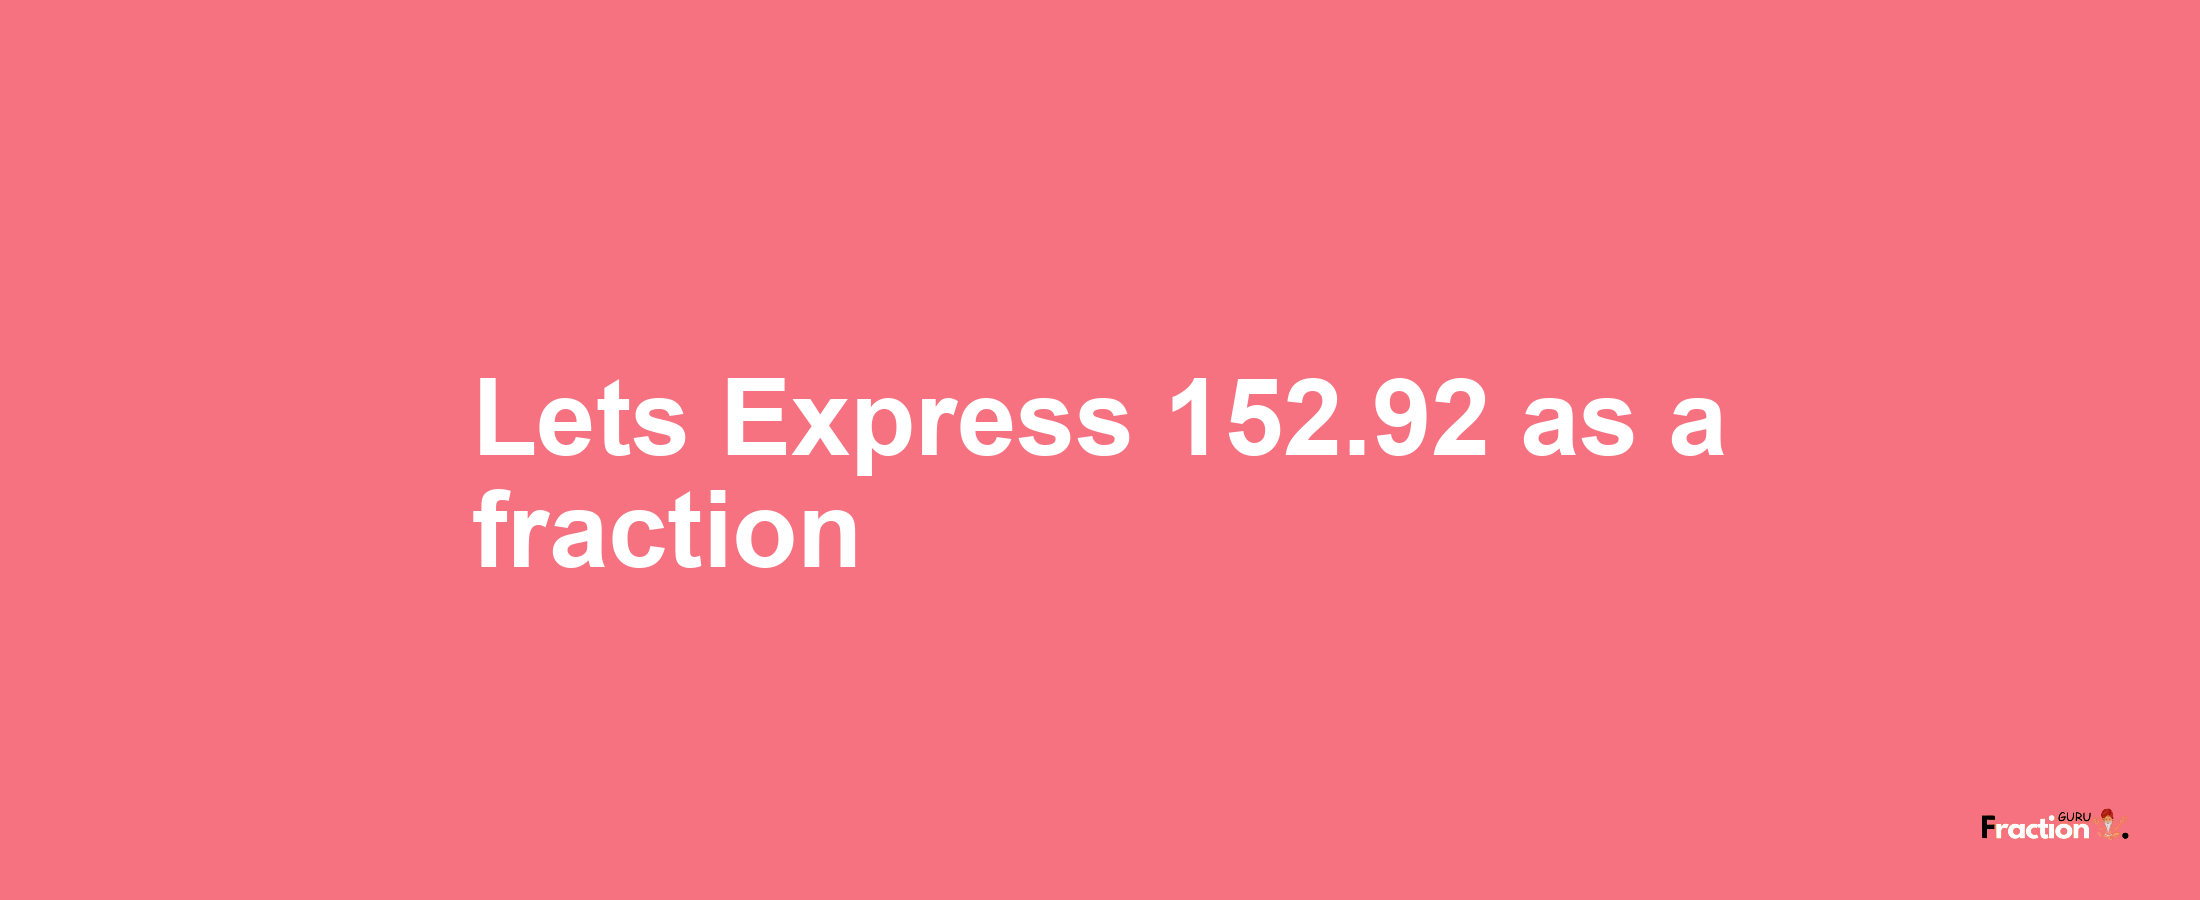 Lets Express 152.92 as afraction